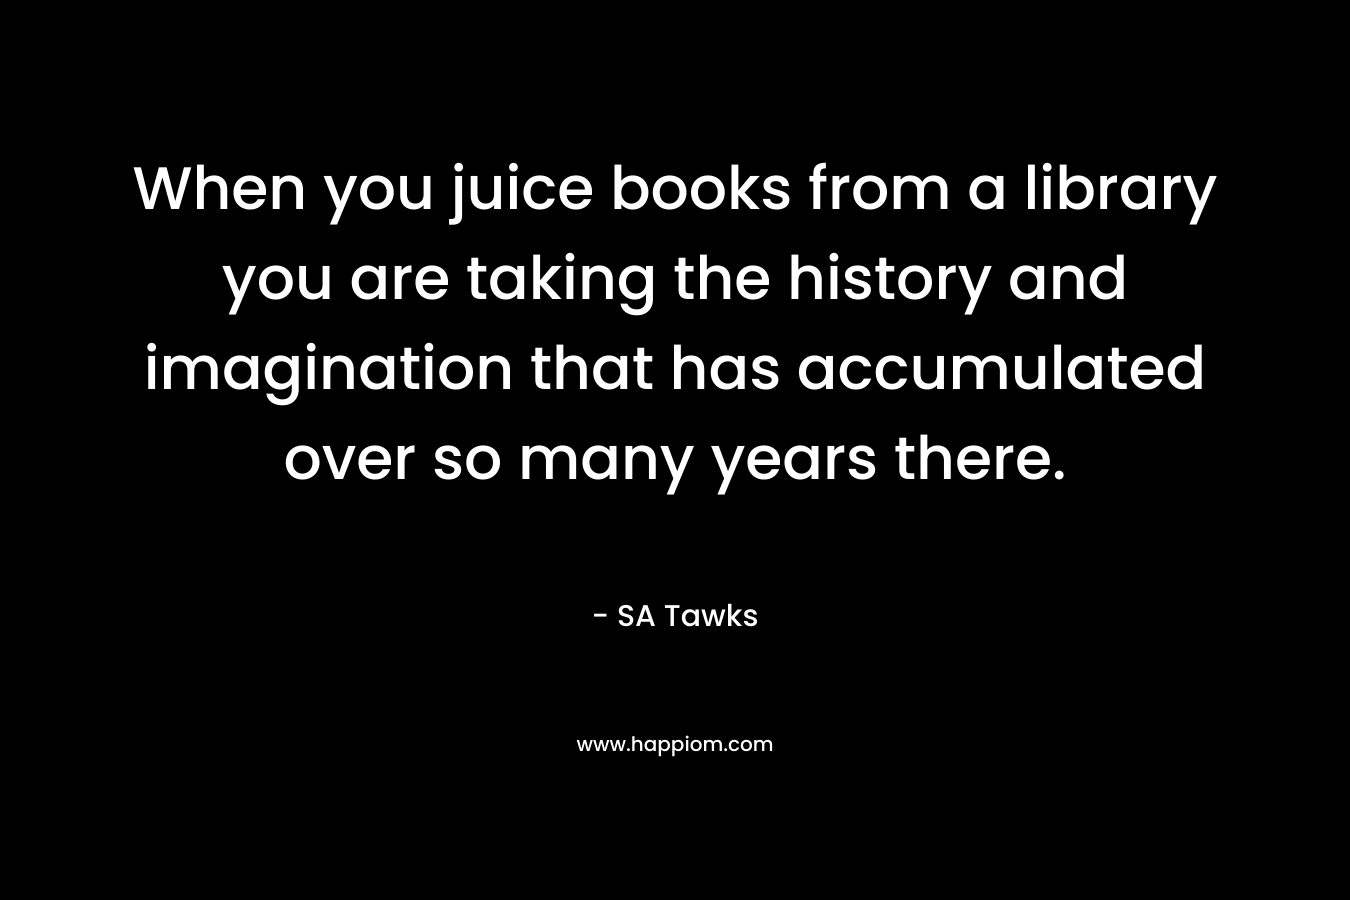 When you juice books from a library you are taking the history and imagination that has accumulated over so many years there. – SA Tawks